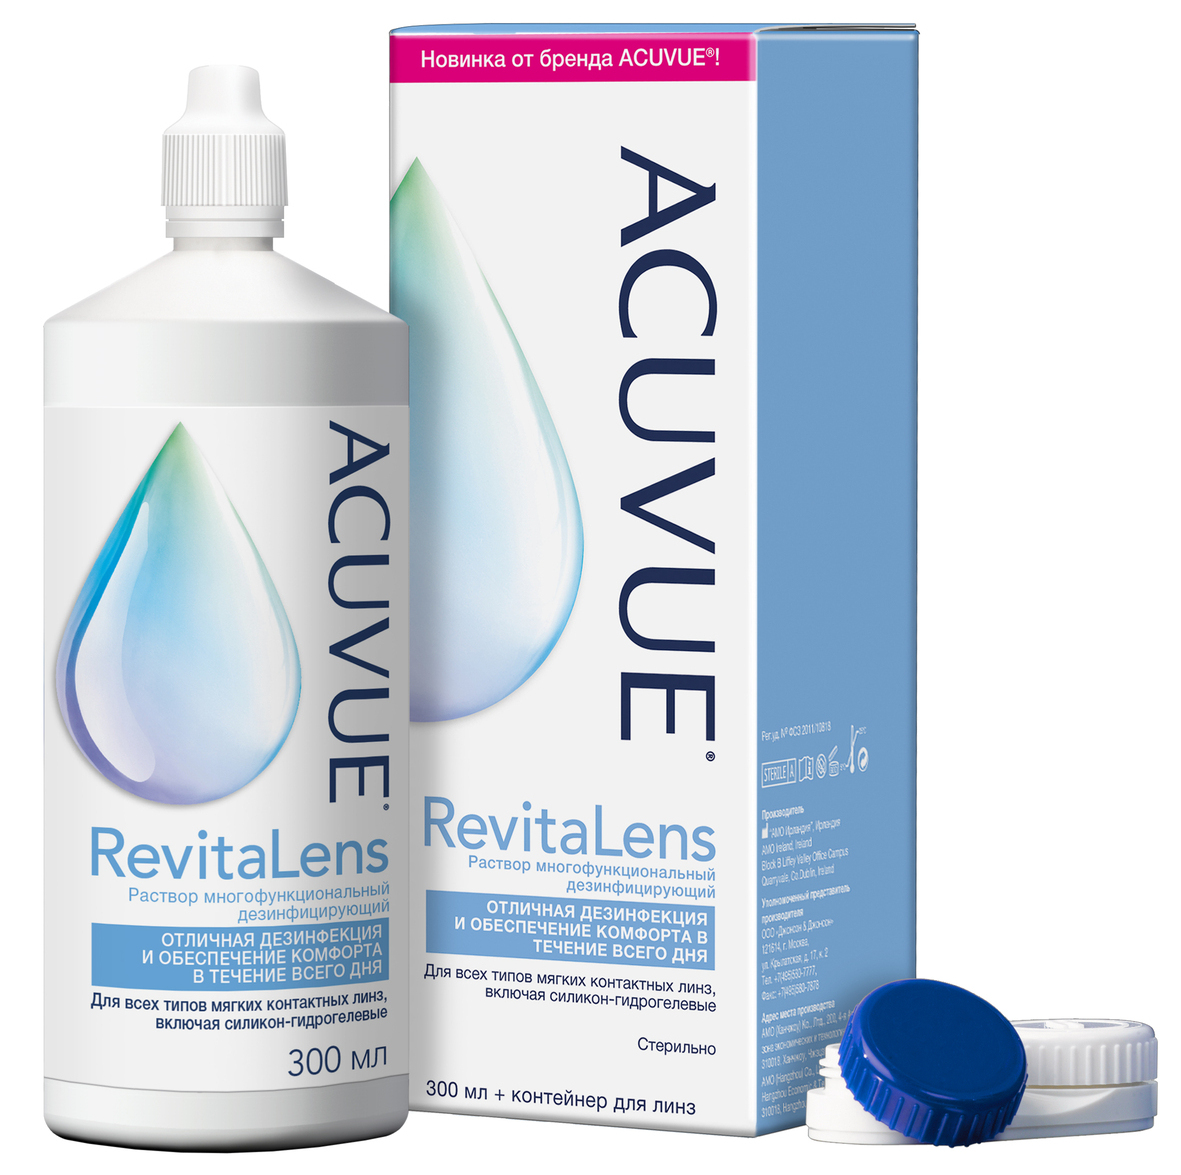 Acuvue RevitaLens 300 мл.